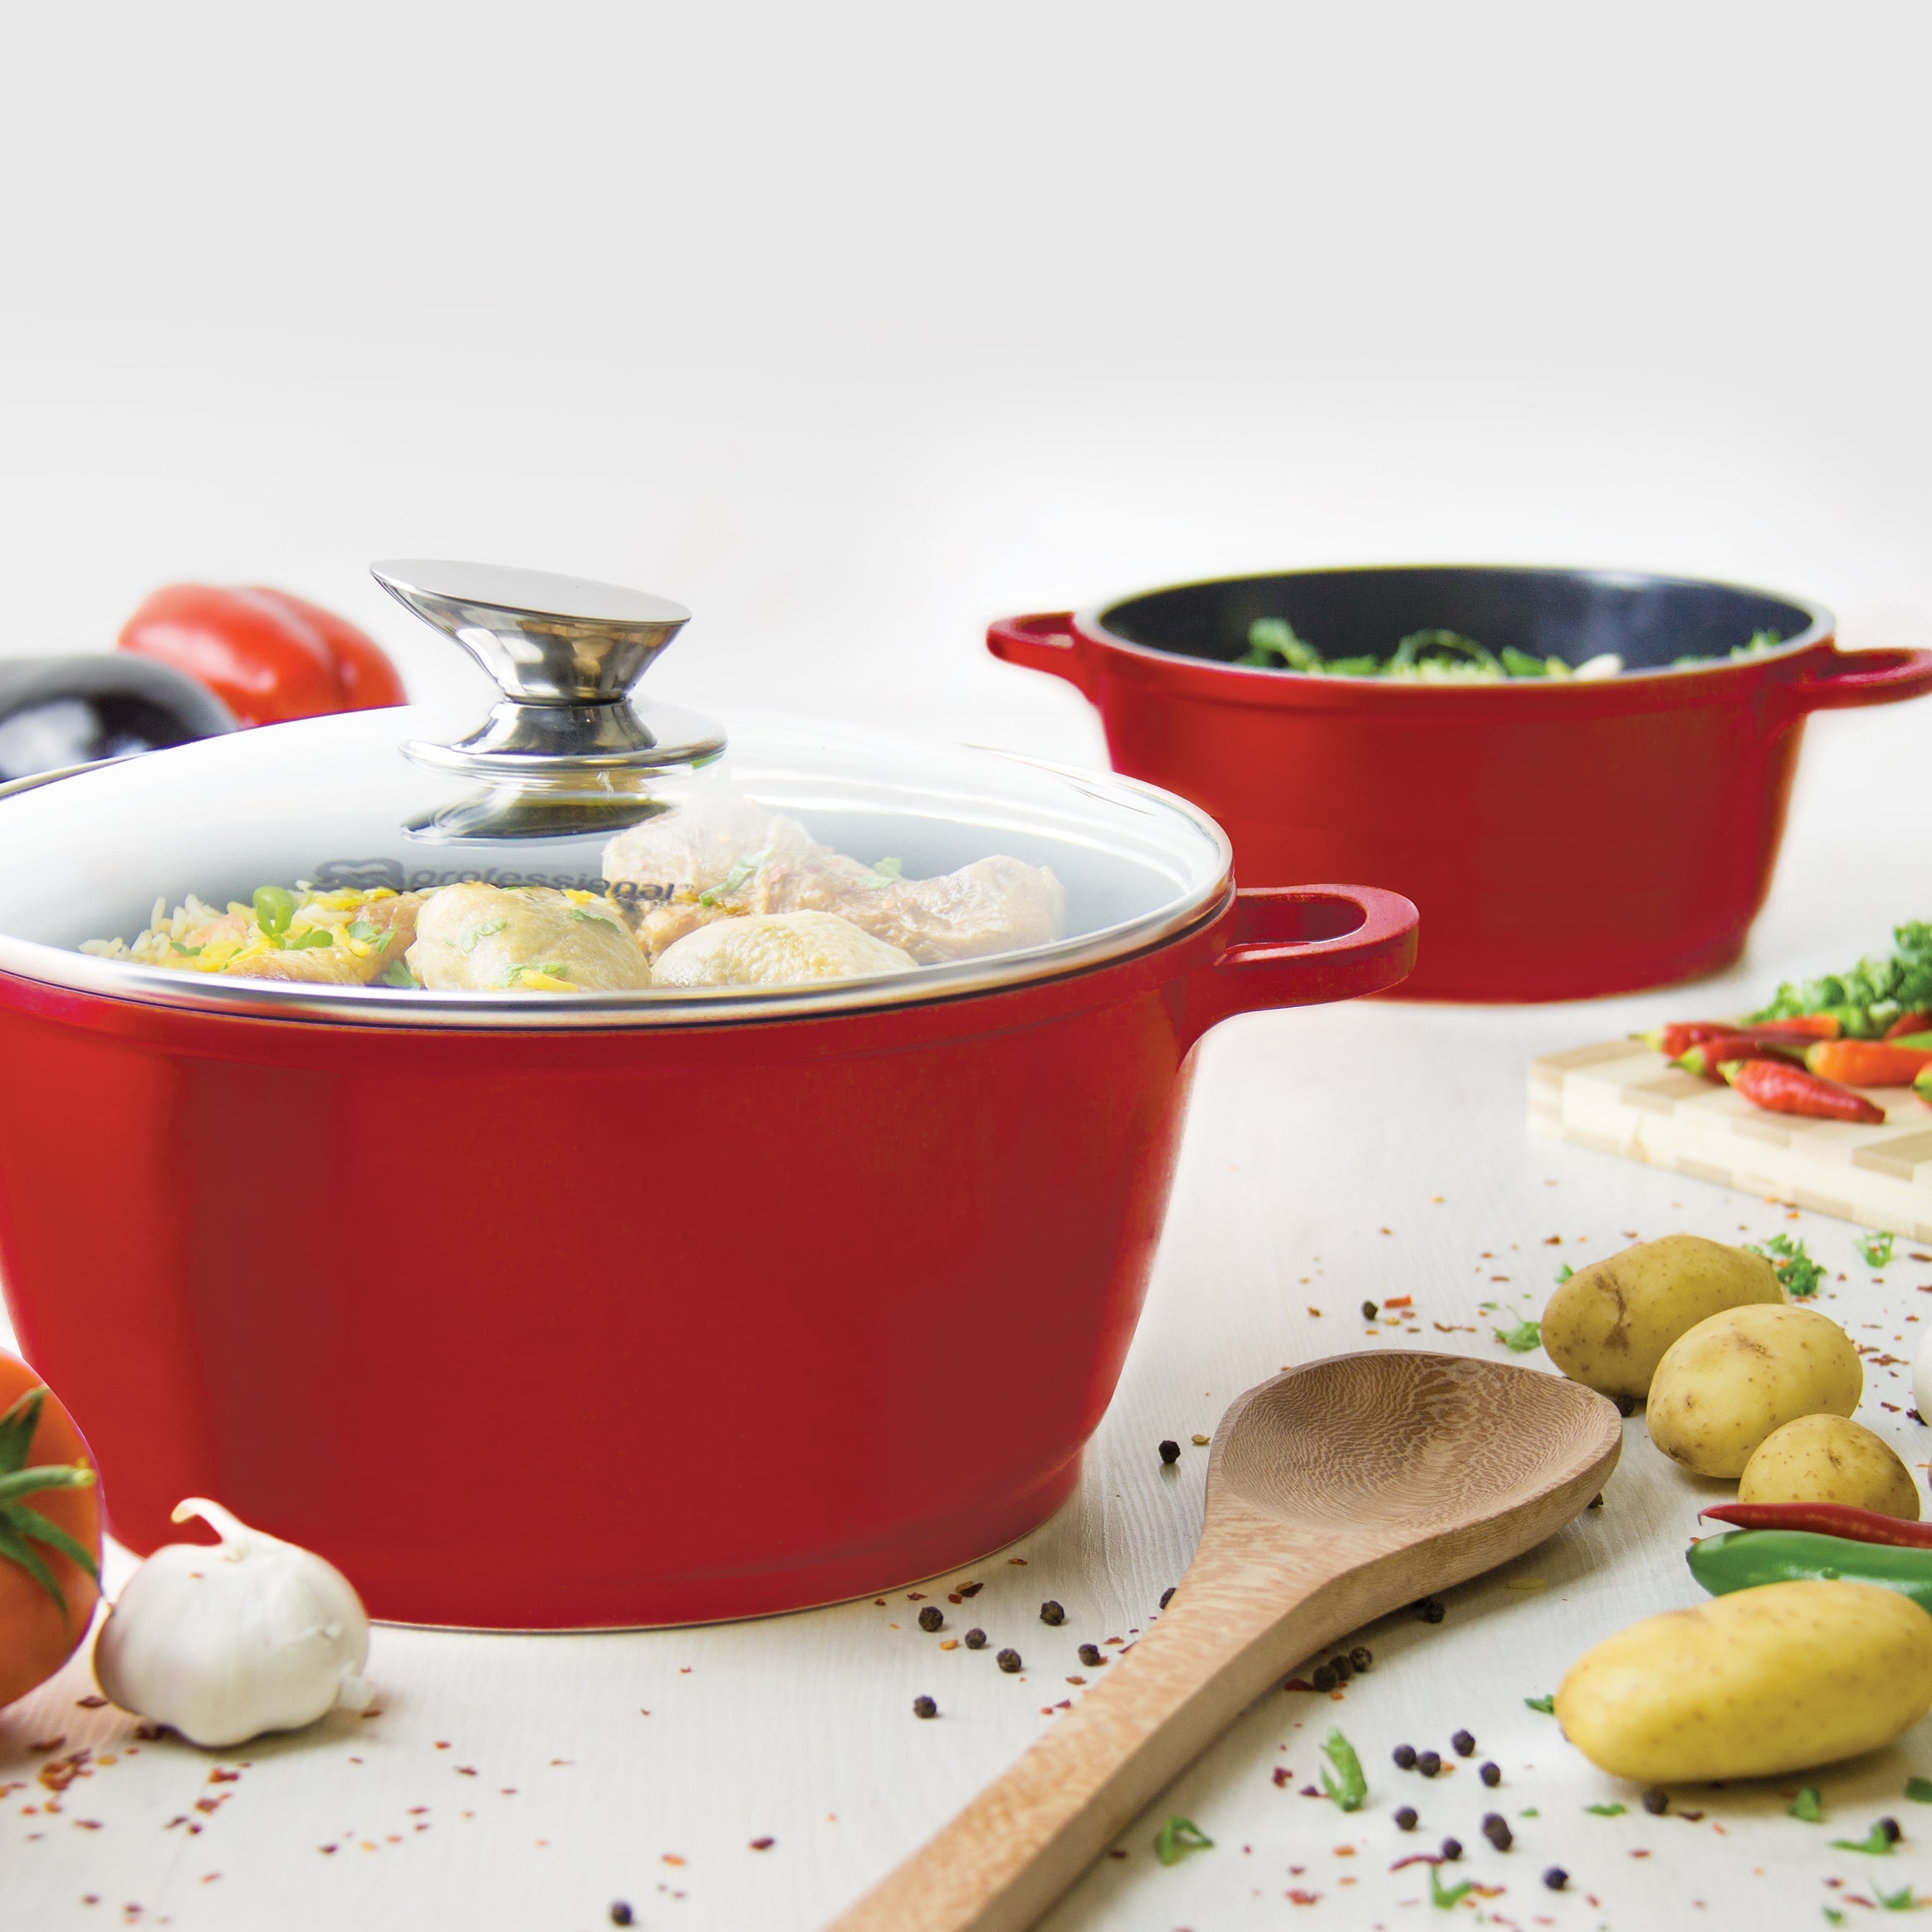 Die Cast Stockpot With Induction - NEA - Red - 24cm